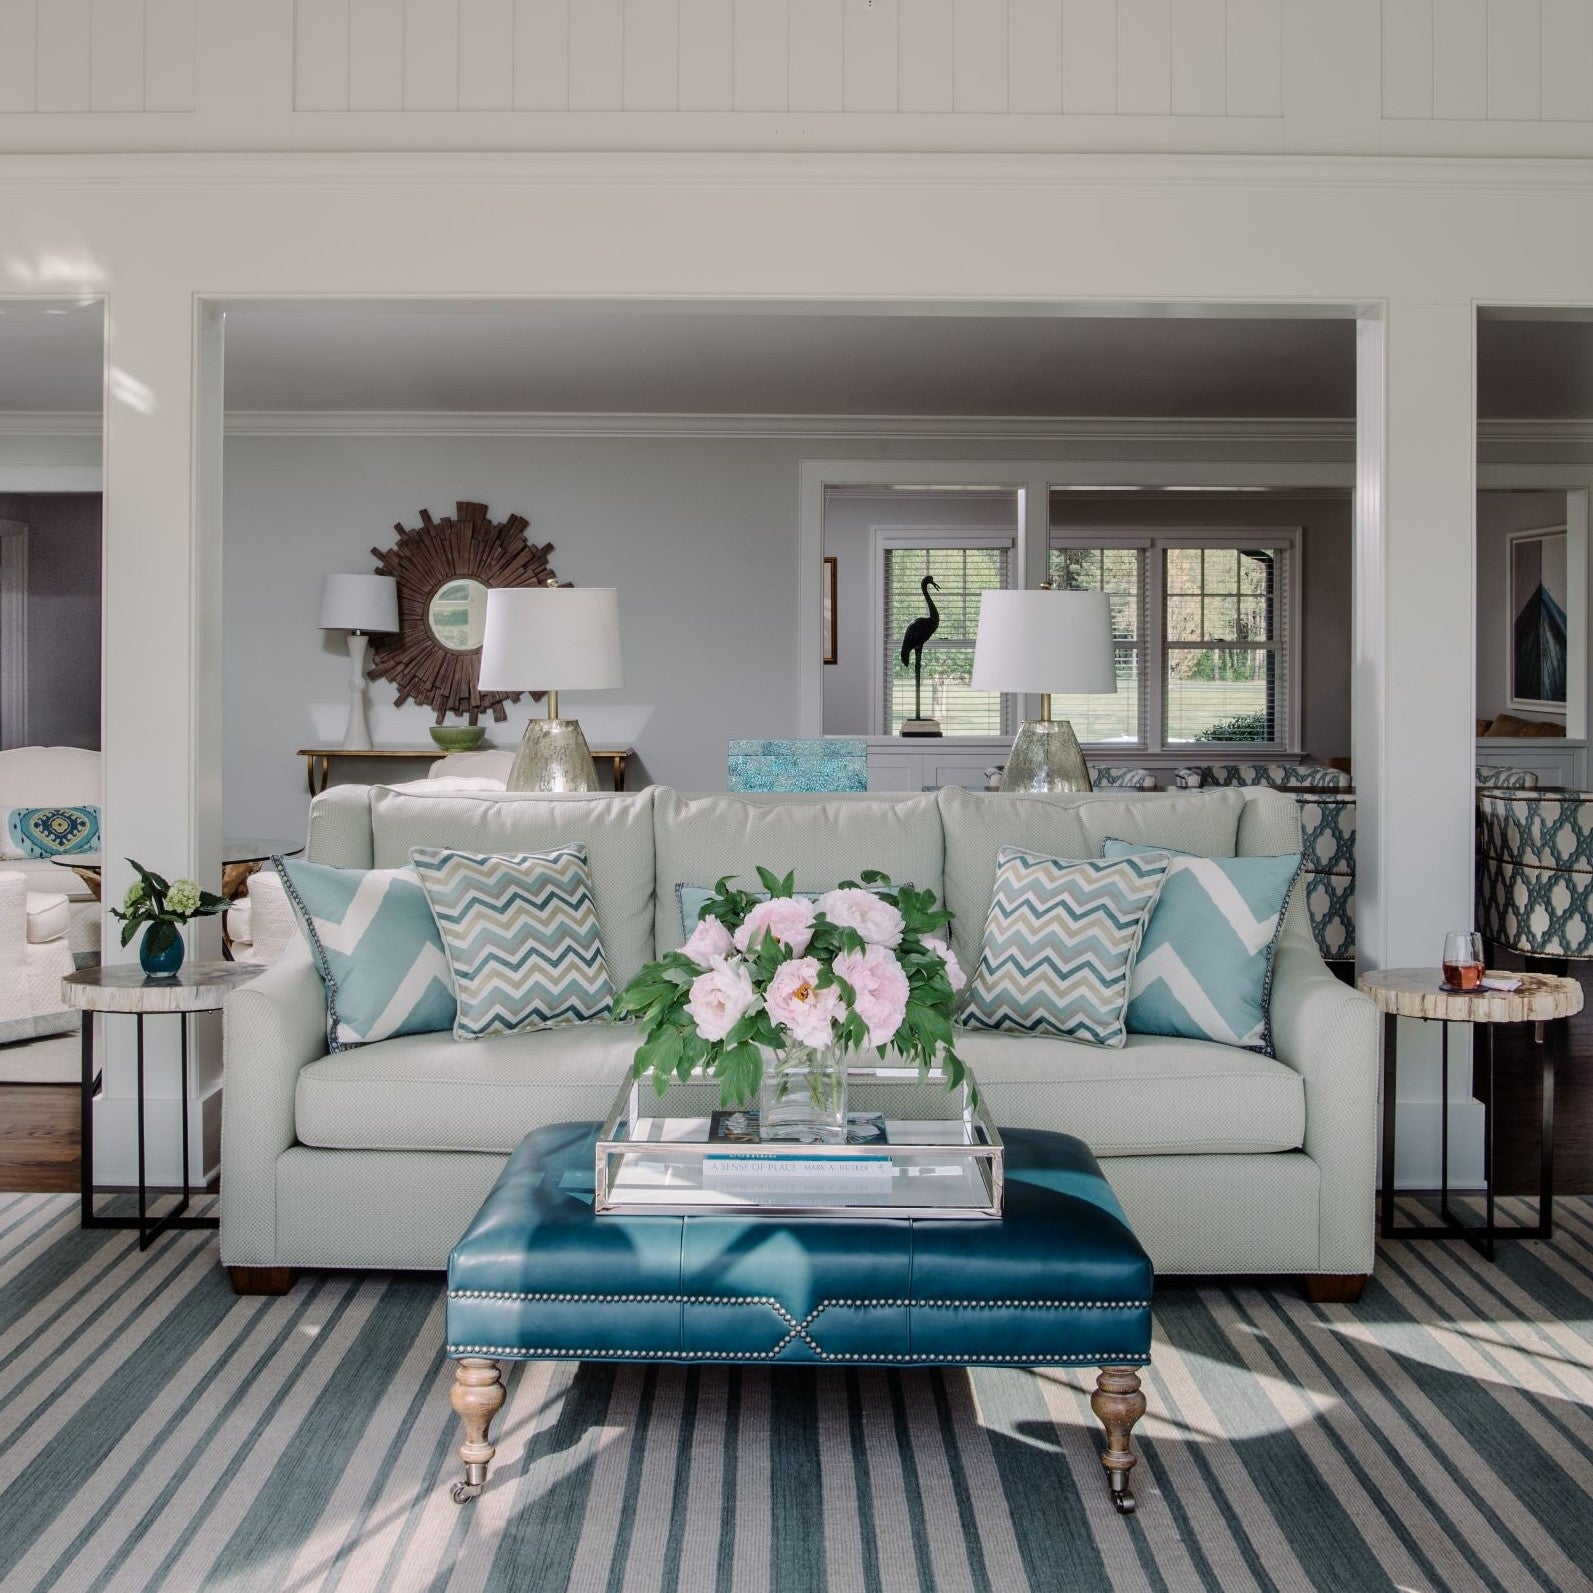 Sunroom with light blue accents and blue leather coffee table and striped rug - interior design by Jamie Merida Interiors